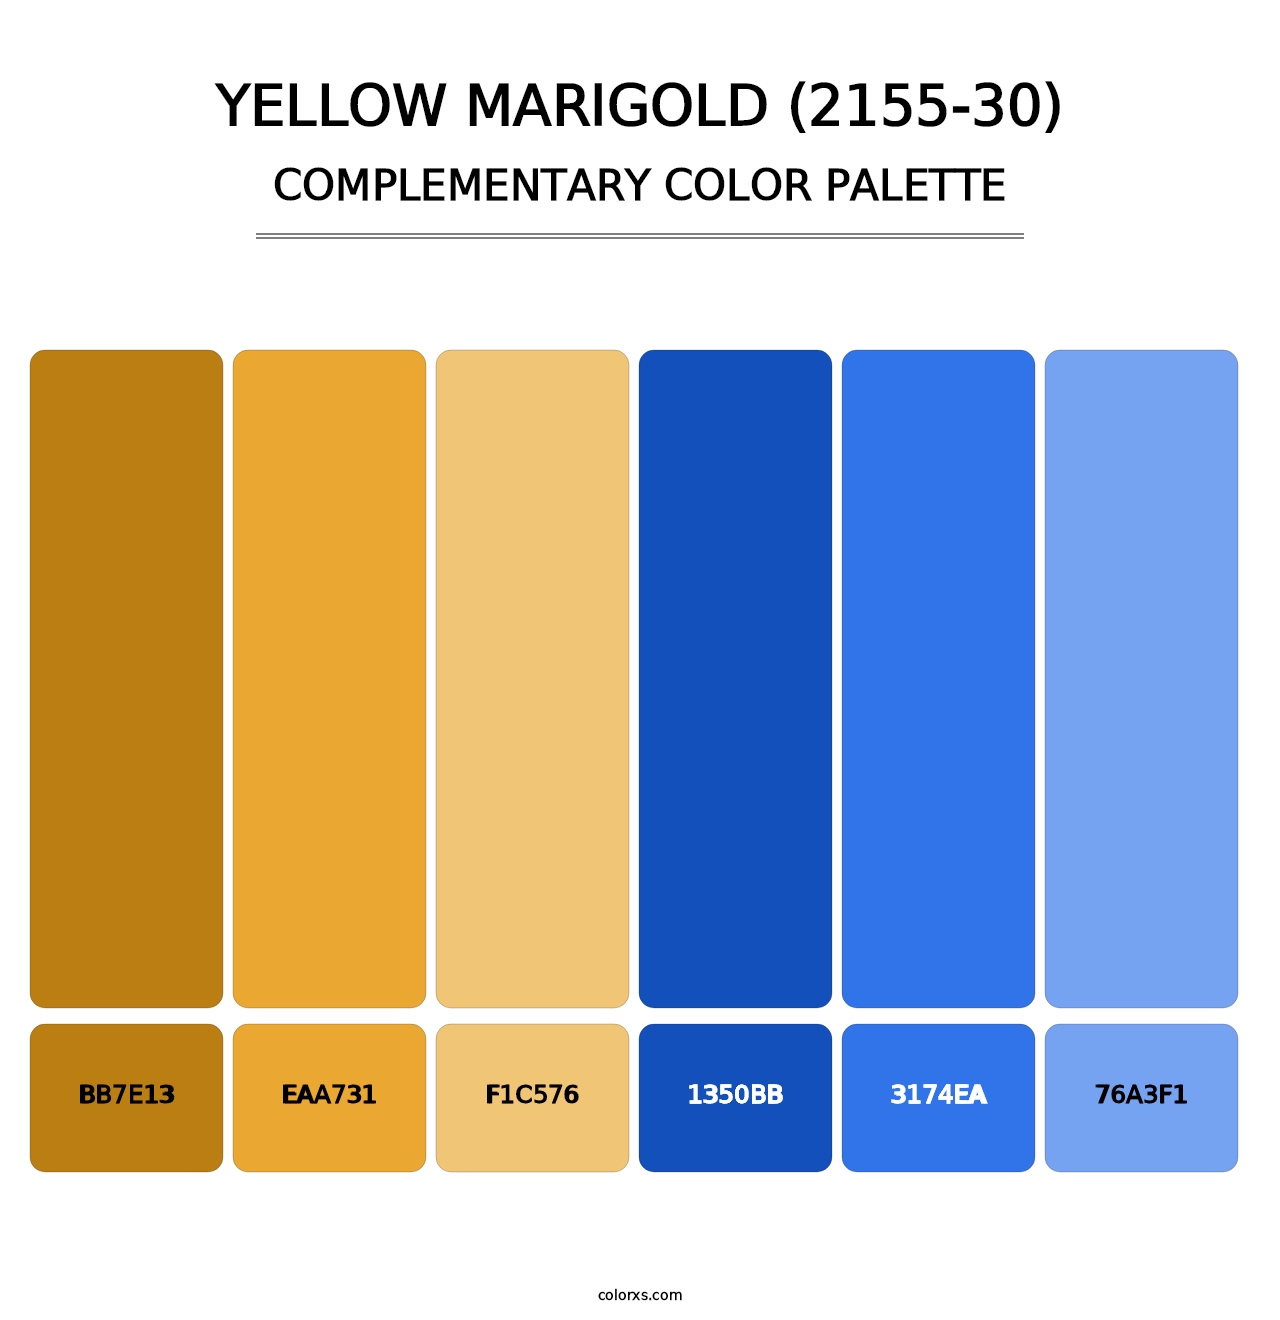 Yellow Marigold (2155-30) - Complementary Color Palette